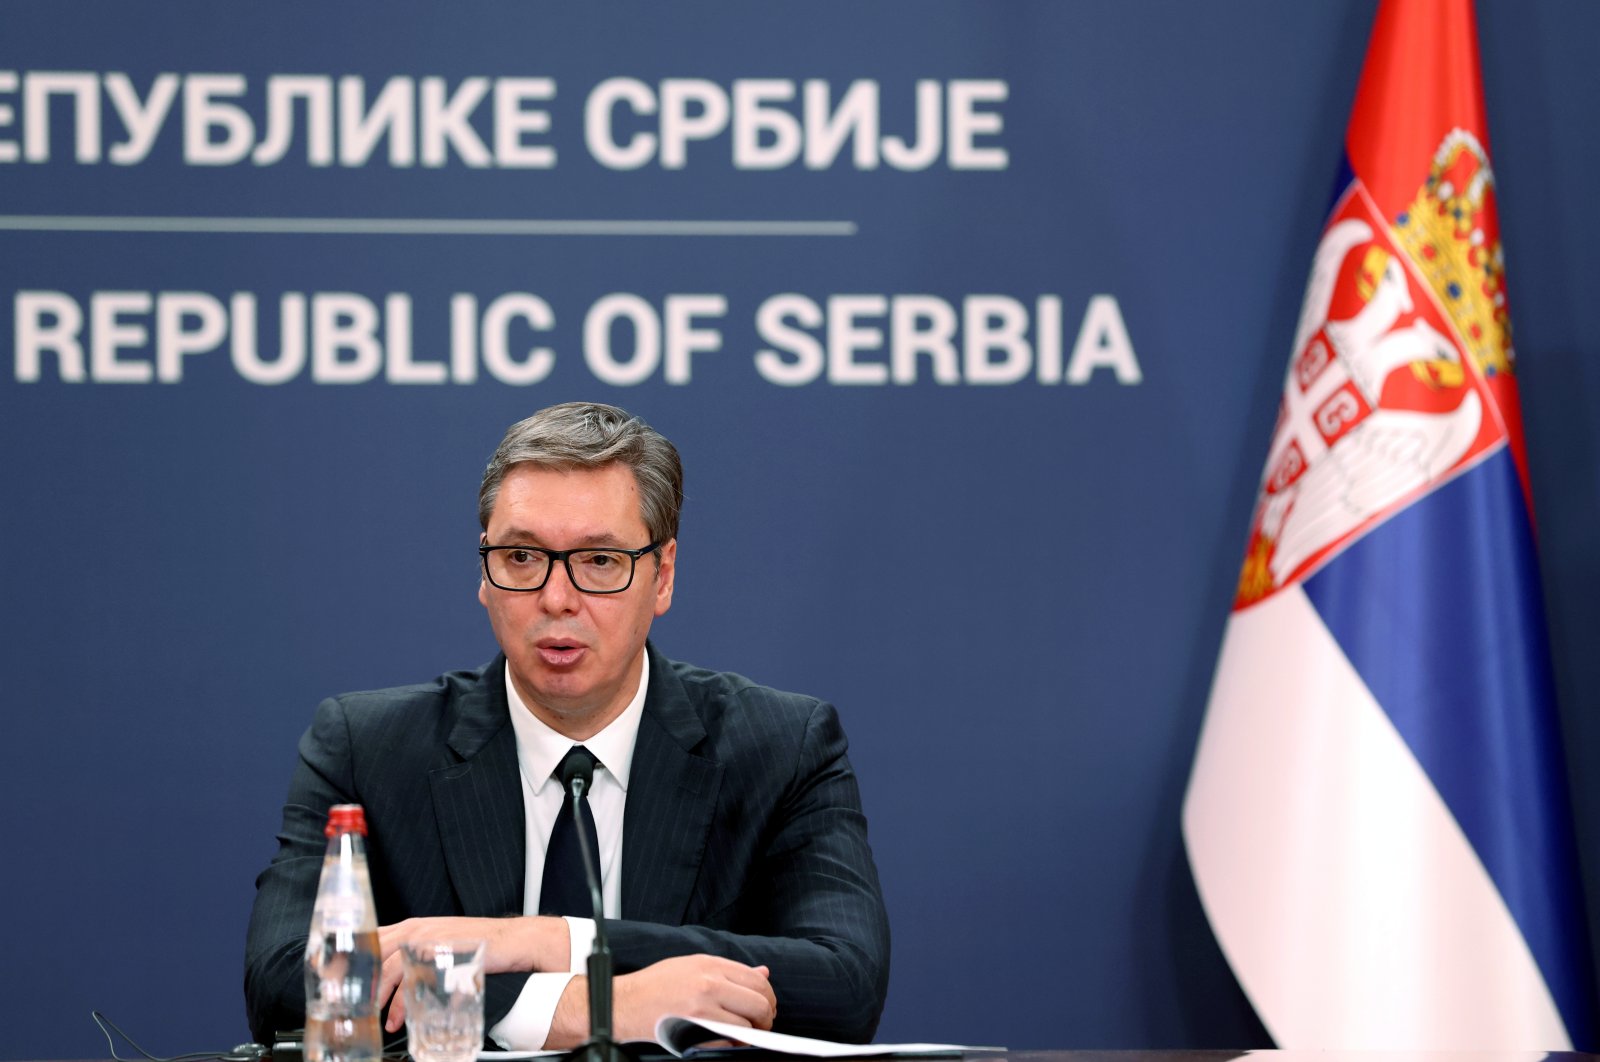 Serbian President Aleksandar Vucic attends a joint press conference with Turkish President Recep Tayyip Erdoğan (not pictured) in Belgrade, Serbia, Sept. 7, 2022. (EPA Photo)